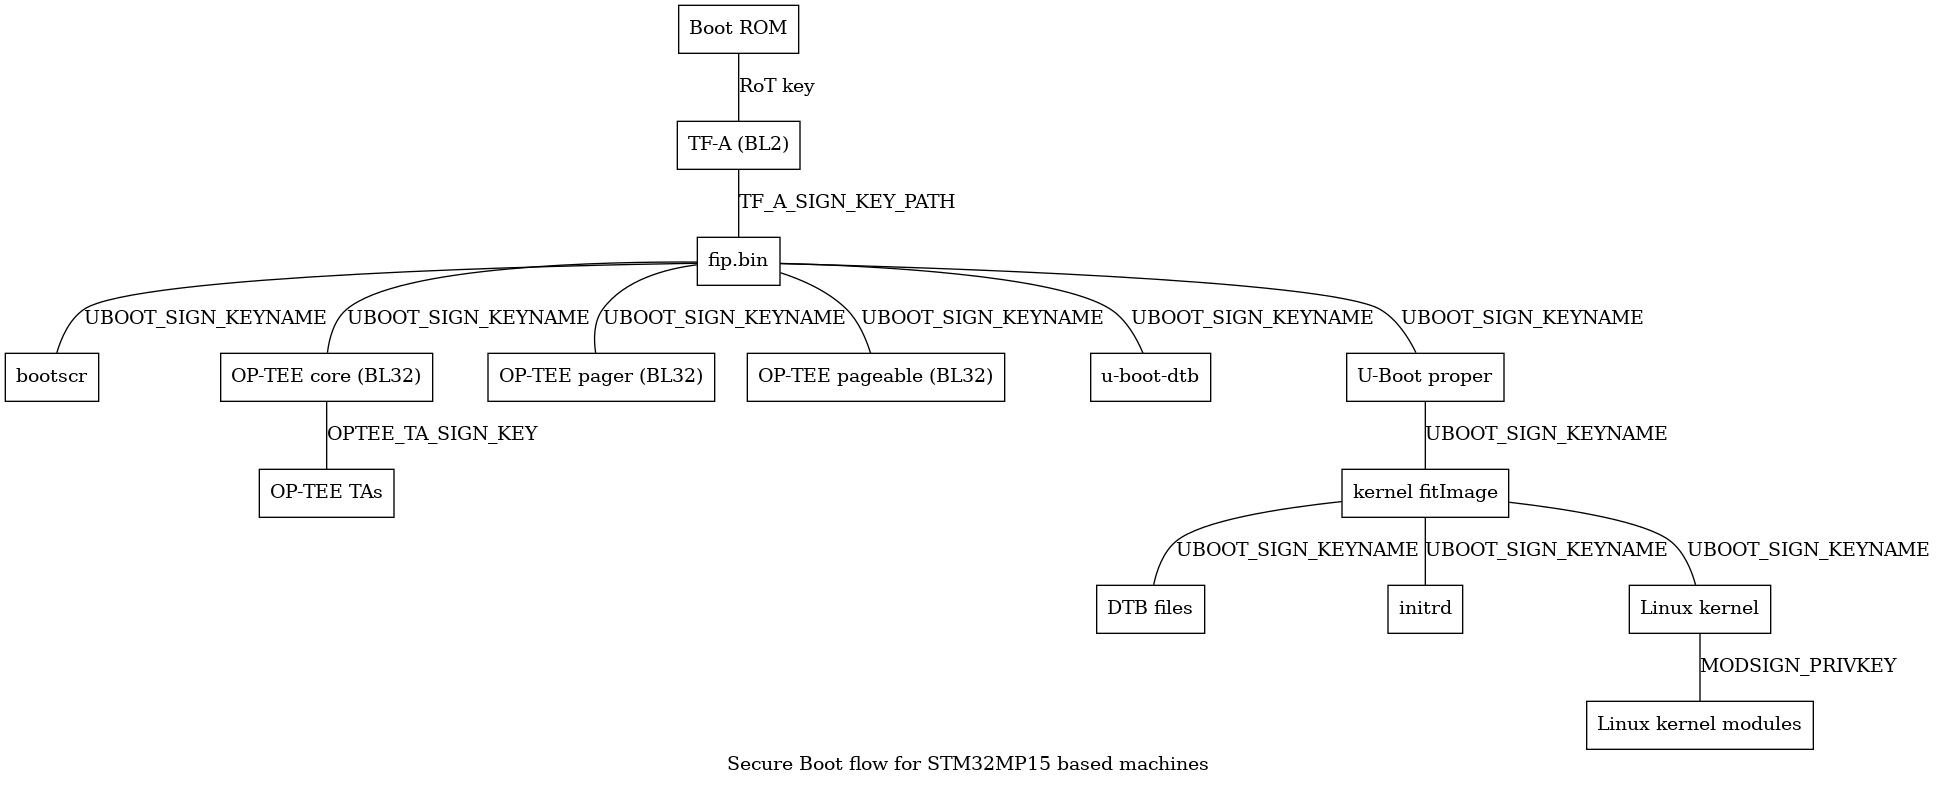 digraph {
     graph [
         label = "Secure Boot flow for STM32MP15 based machines"
     ];
     node [
         shape=box
     ];
     edge [
         arrowhead=none
     ];
     "Boot ROM"           -> "TF-A (BL2)"            [label = "RoT key"];
     "TF-A (BL2)"         -> "fip.bin"               [label = "TF_A_SIGN_KEY_PATH"];
     "fip.bin"            -> "bootscr"               [label = "UBOOT_SIGN_KEYNAME"];
     "fip.bin"            -> "OP-TEE core (BL32)"    [label = "UBOOT_SIGN_KEYNAME"];
     "fip.bin"            -> "OP-TEE pager (BL32)"   [label = "UBOOT_SIGN_KEYNAME"];
     "fip.bin"            -> "OP-TEE pageable (BL32)" [label = "UBOOT_SIGN_KEYNAME"];
     "OP-TEE core (BL32)" -> "OP-TEE TAs"            [label = "OPTEE_TA_SIGN_KEY"];
     "fip.bin"            -> "u-boot-dtb"            [label = "UBOOT_SIGN_KEYNAME"];
     "fip.bin"            -> "U-Boot proper"         [label = "UBOOT_SIGN_KEYNAME"];
     "U-Boot proper"      -> "kernel fitImage"       [label = "UBOOT_SIGN_KEYNAME"];
     "kernel fitImage"    -> "DTB files"             [label = "UBOOT_SIGN_KEYNAME"];
     "kernel fitImage"    -> "initrd"                [label = "UBOOT_SIGN_KEYNAME"];
     "kernel fitImage"    -> "Linux kernel"          [label = "UBOOT_SIGN_KEYNAME"];
     "Linux kernel"       -> "Linux kernel modules"  [label = "MODSIGN_PRIVKEY"];
}